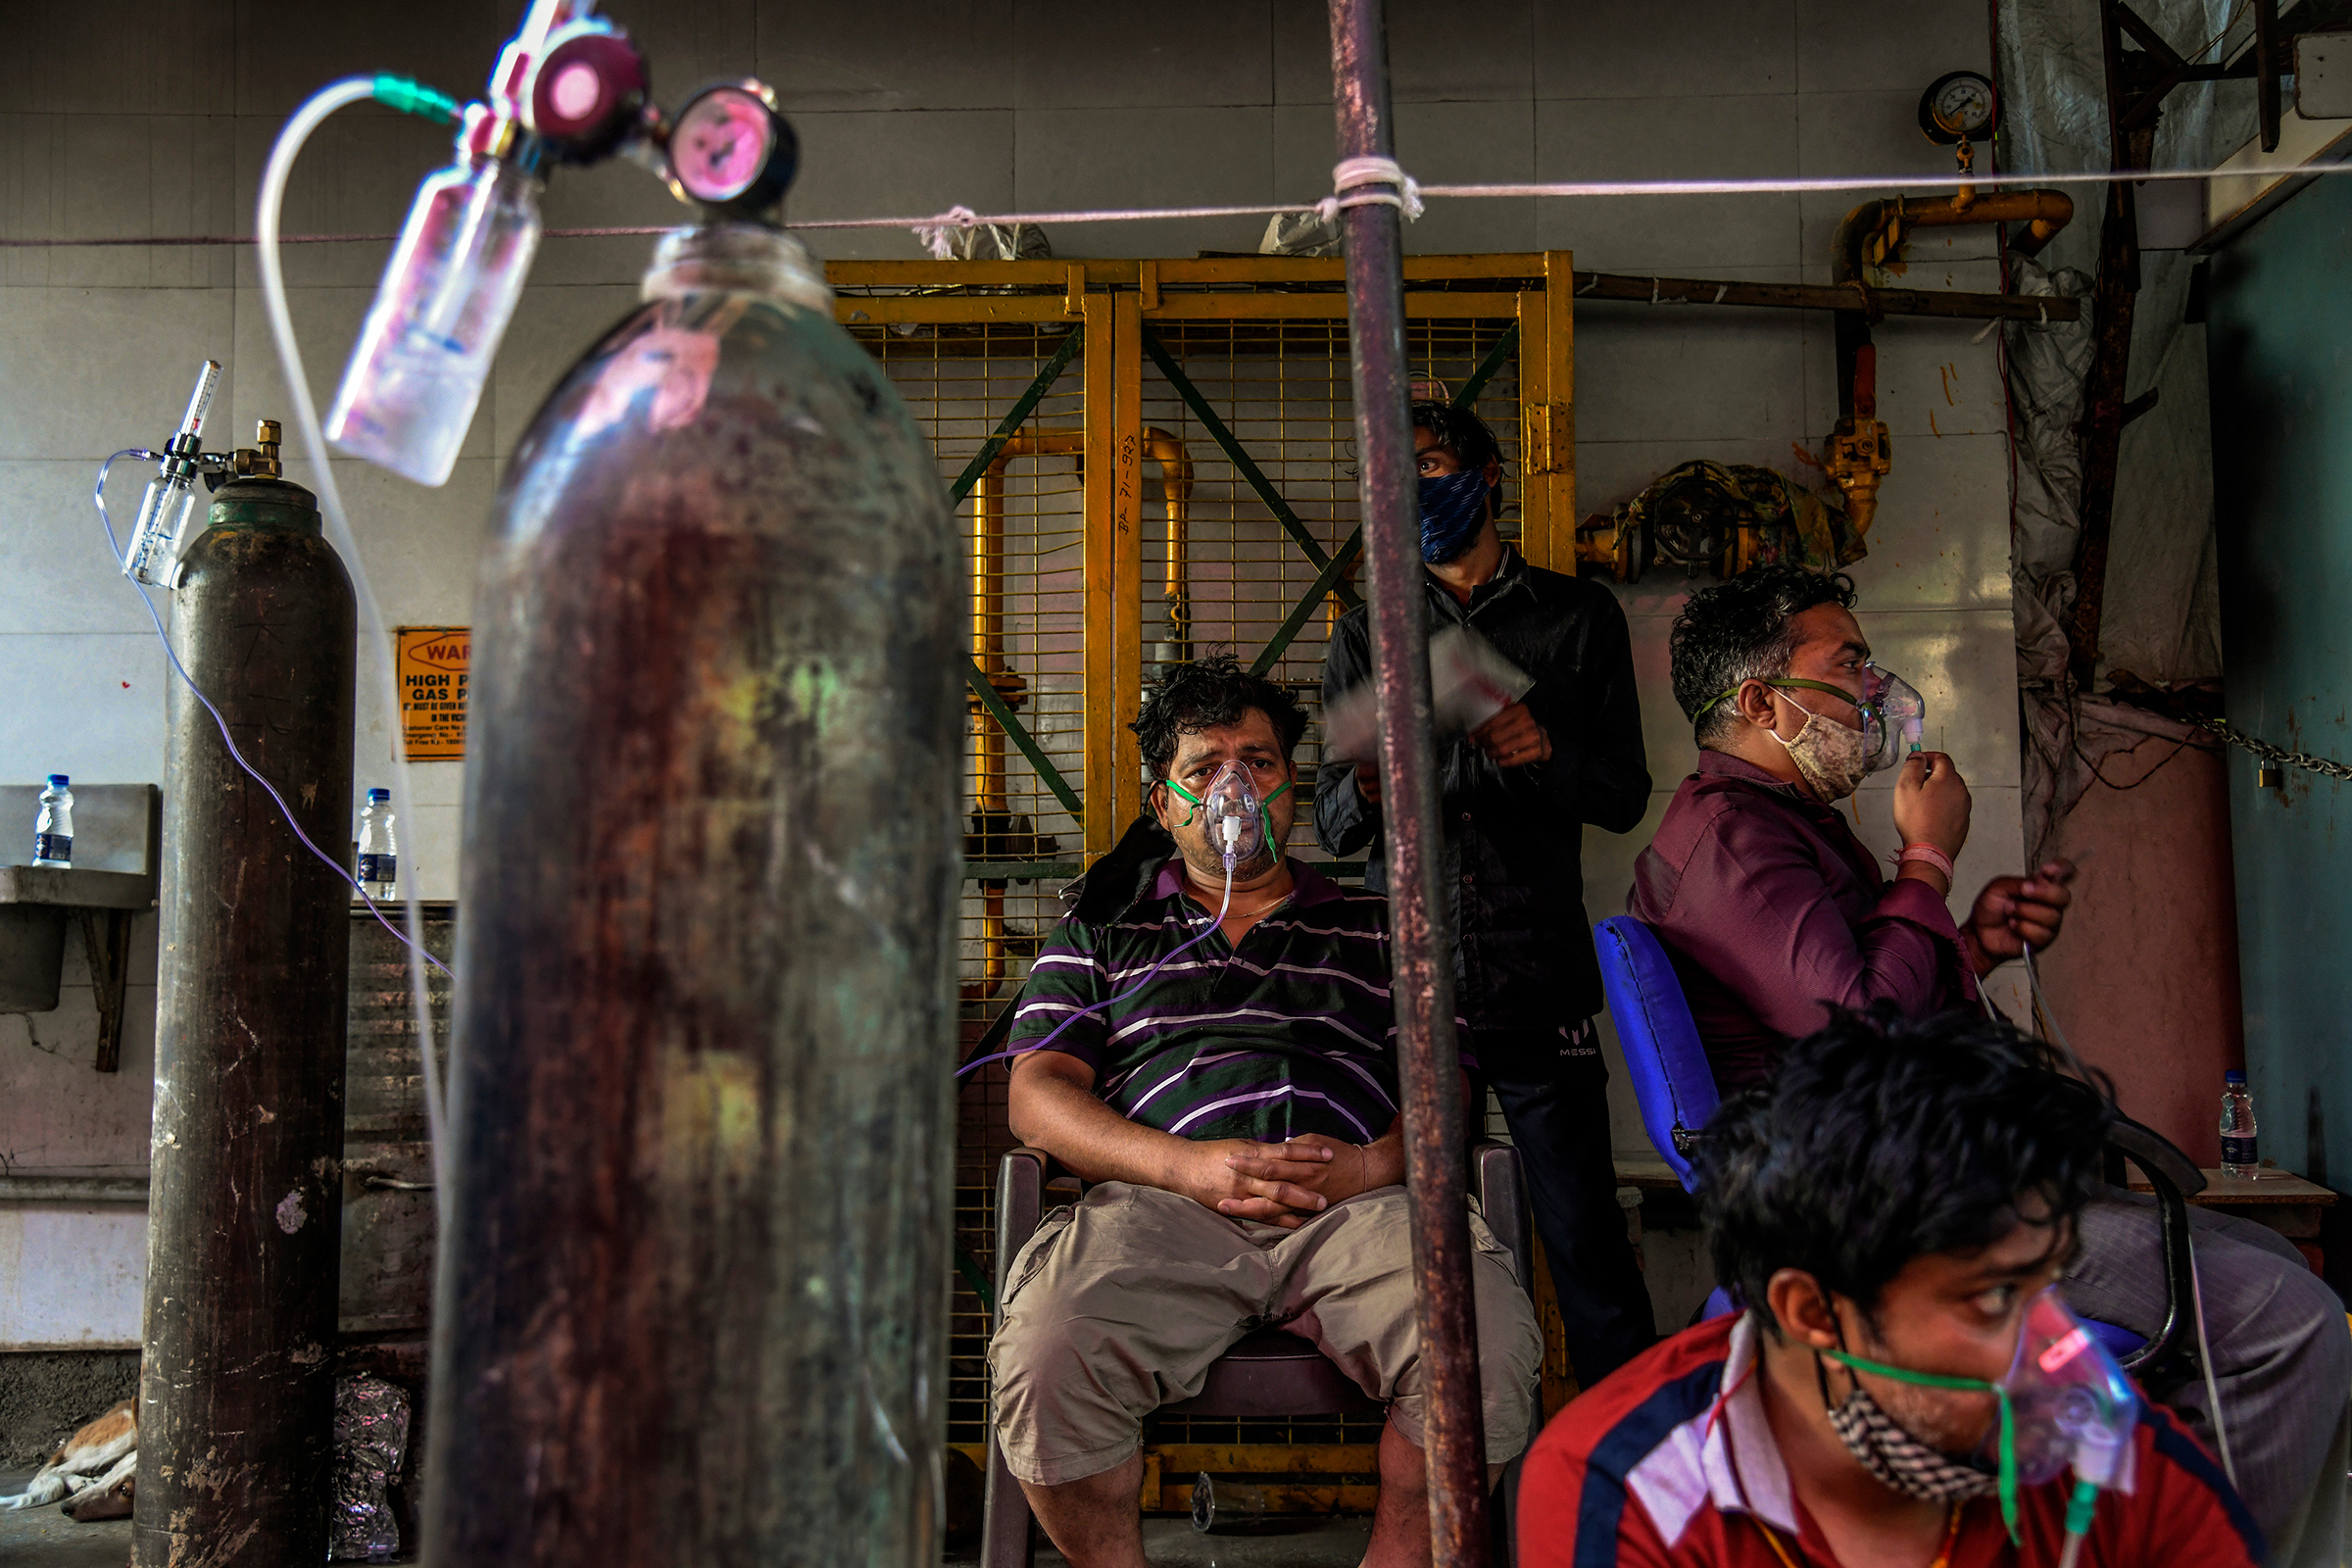 With hospitals full, COVID-19 patients receive oxygen outside a Sikh temple in Delhi on April 25. (Atul Loke—The New York Times/Redux)